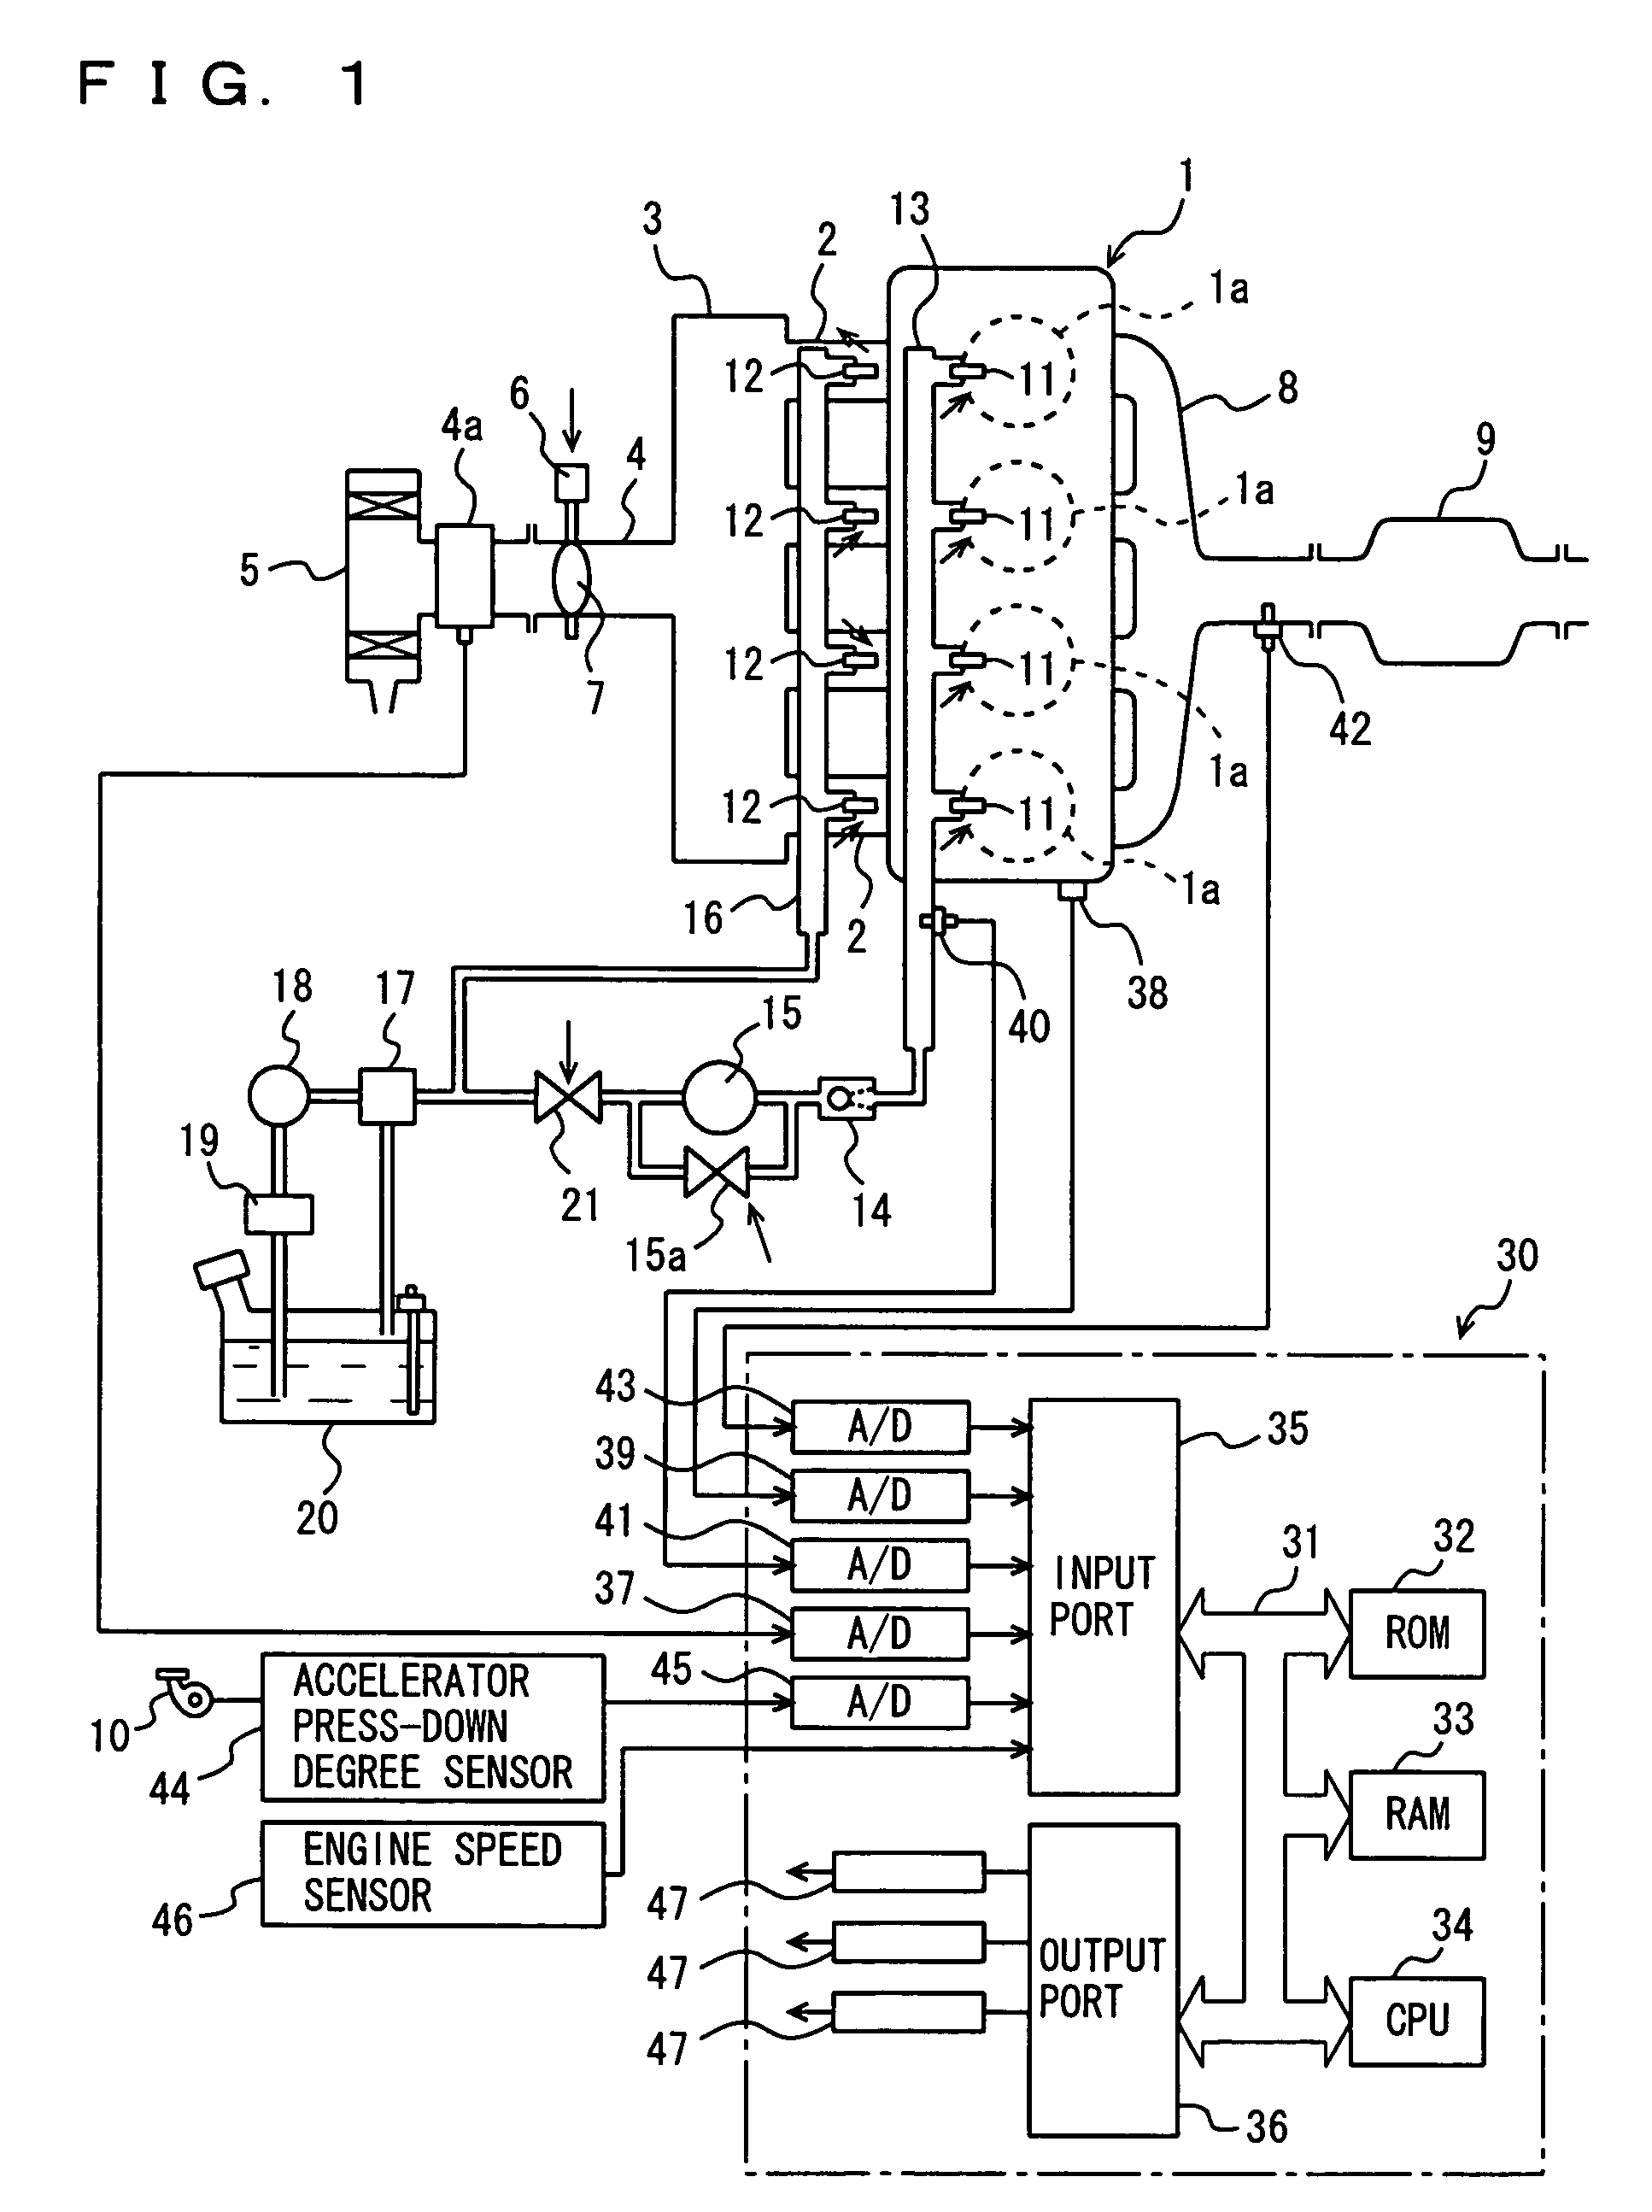 Ignition timing control apparatus for internal combustion engine